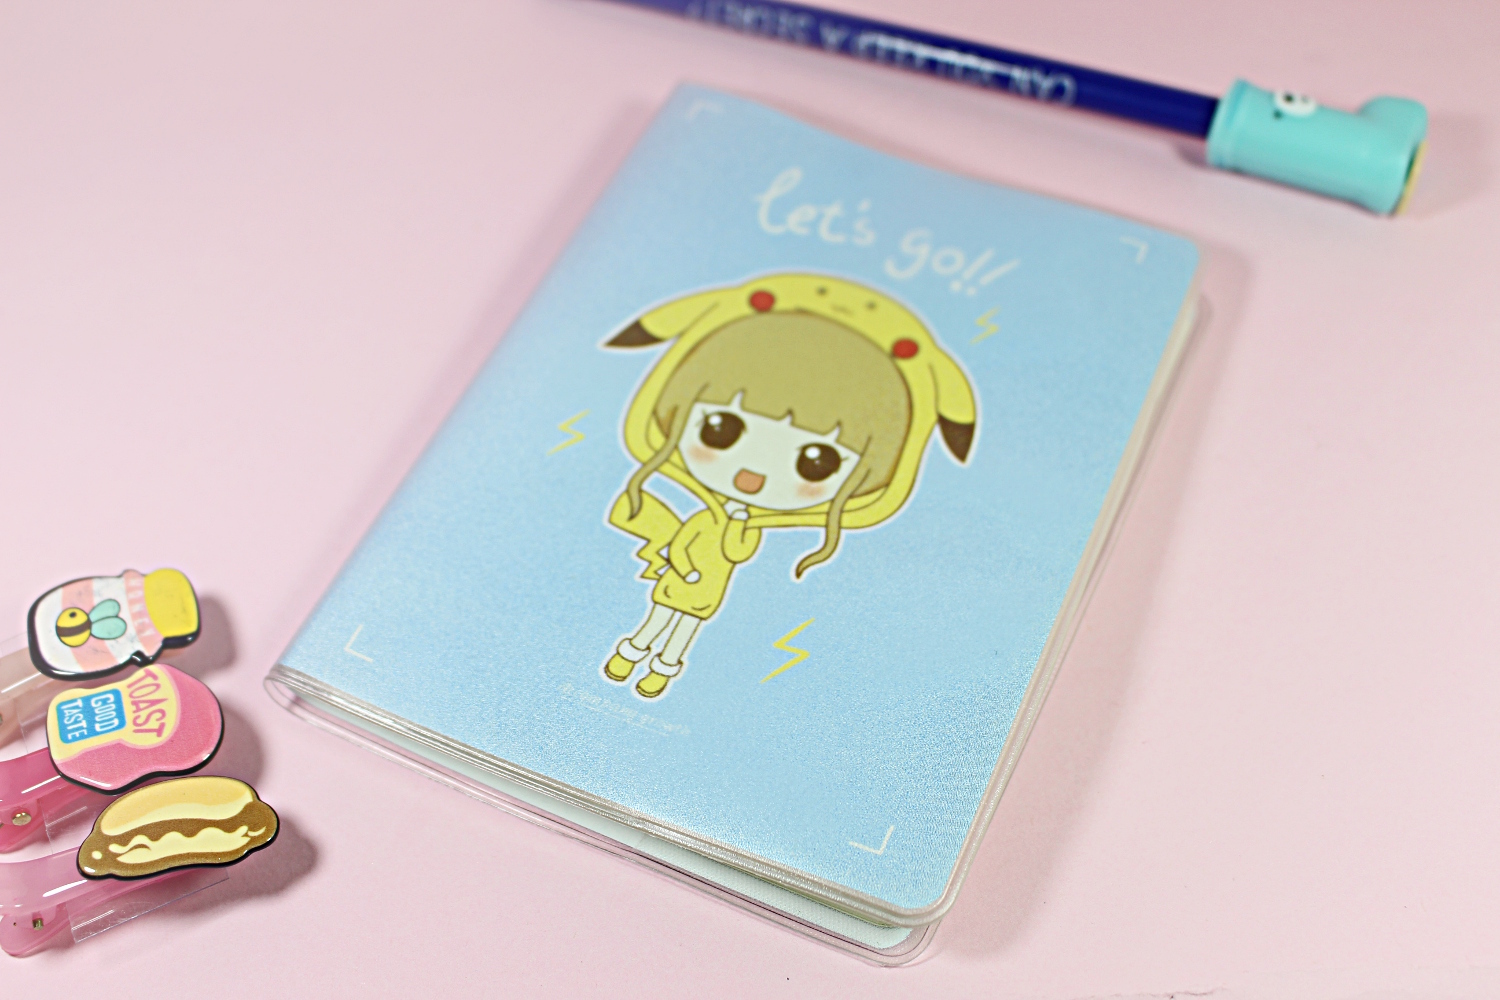 Let's Go Mini Notebook january girl unboxing video cute little items adorable toys review